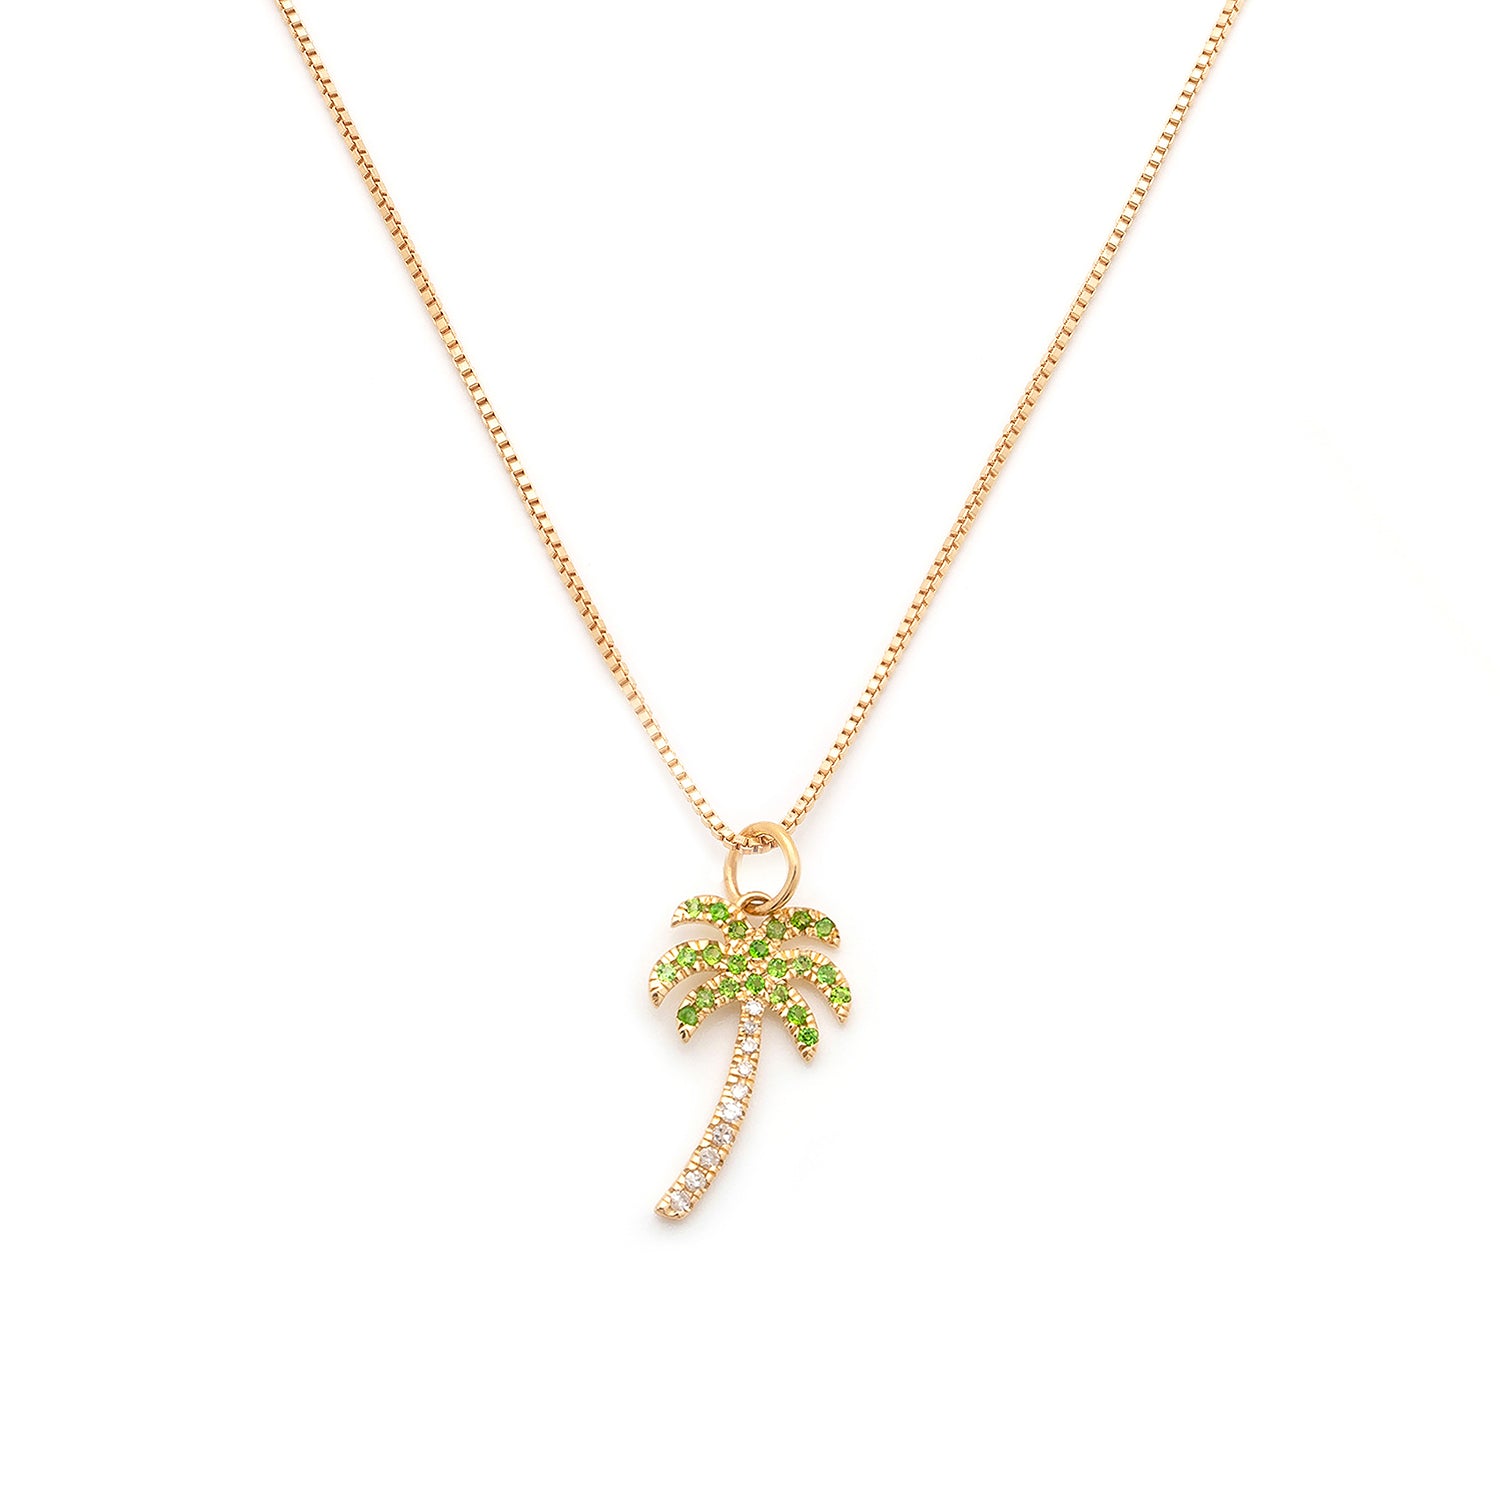 18K YELLOW GOLD TINY TREASURES PALM TREE NECKLACE - Roberto Coin - North  America